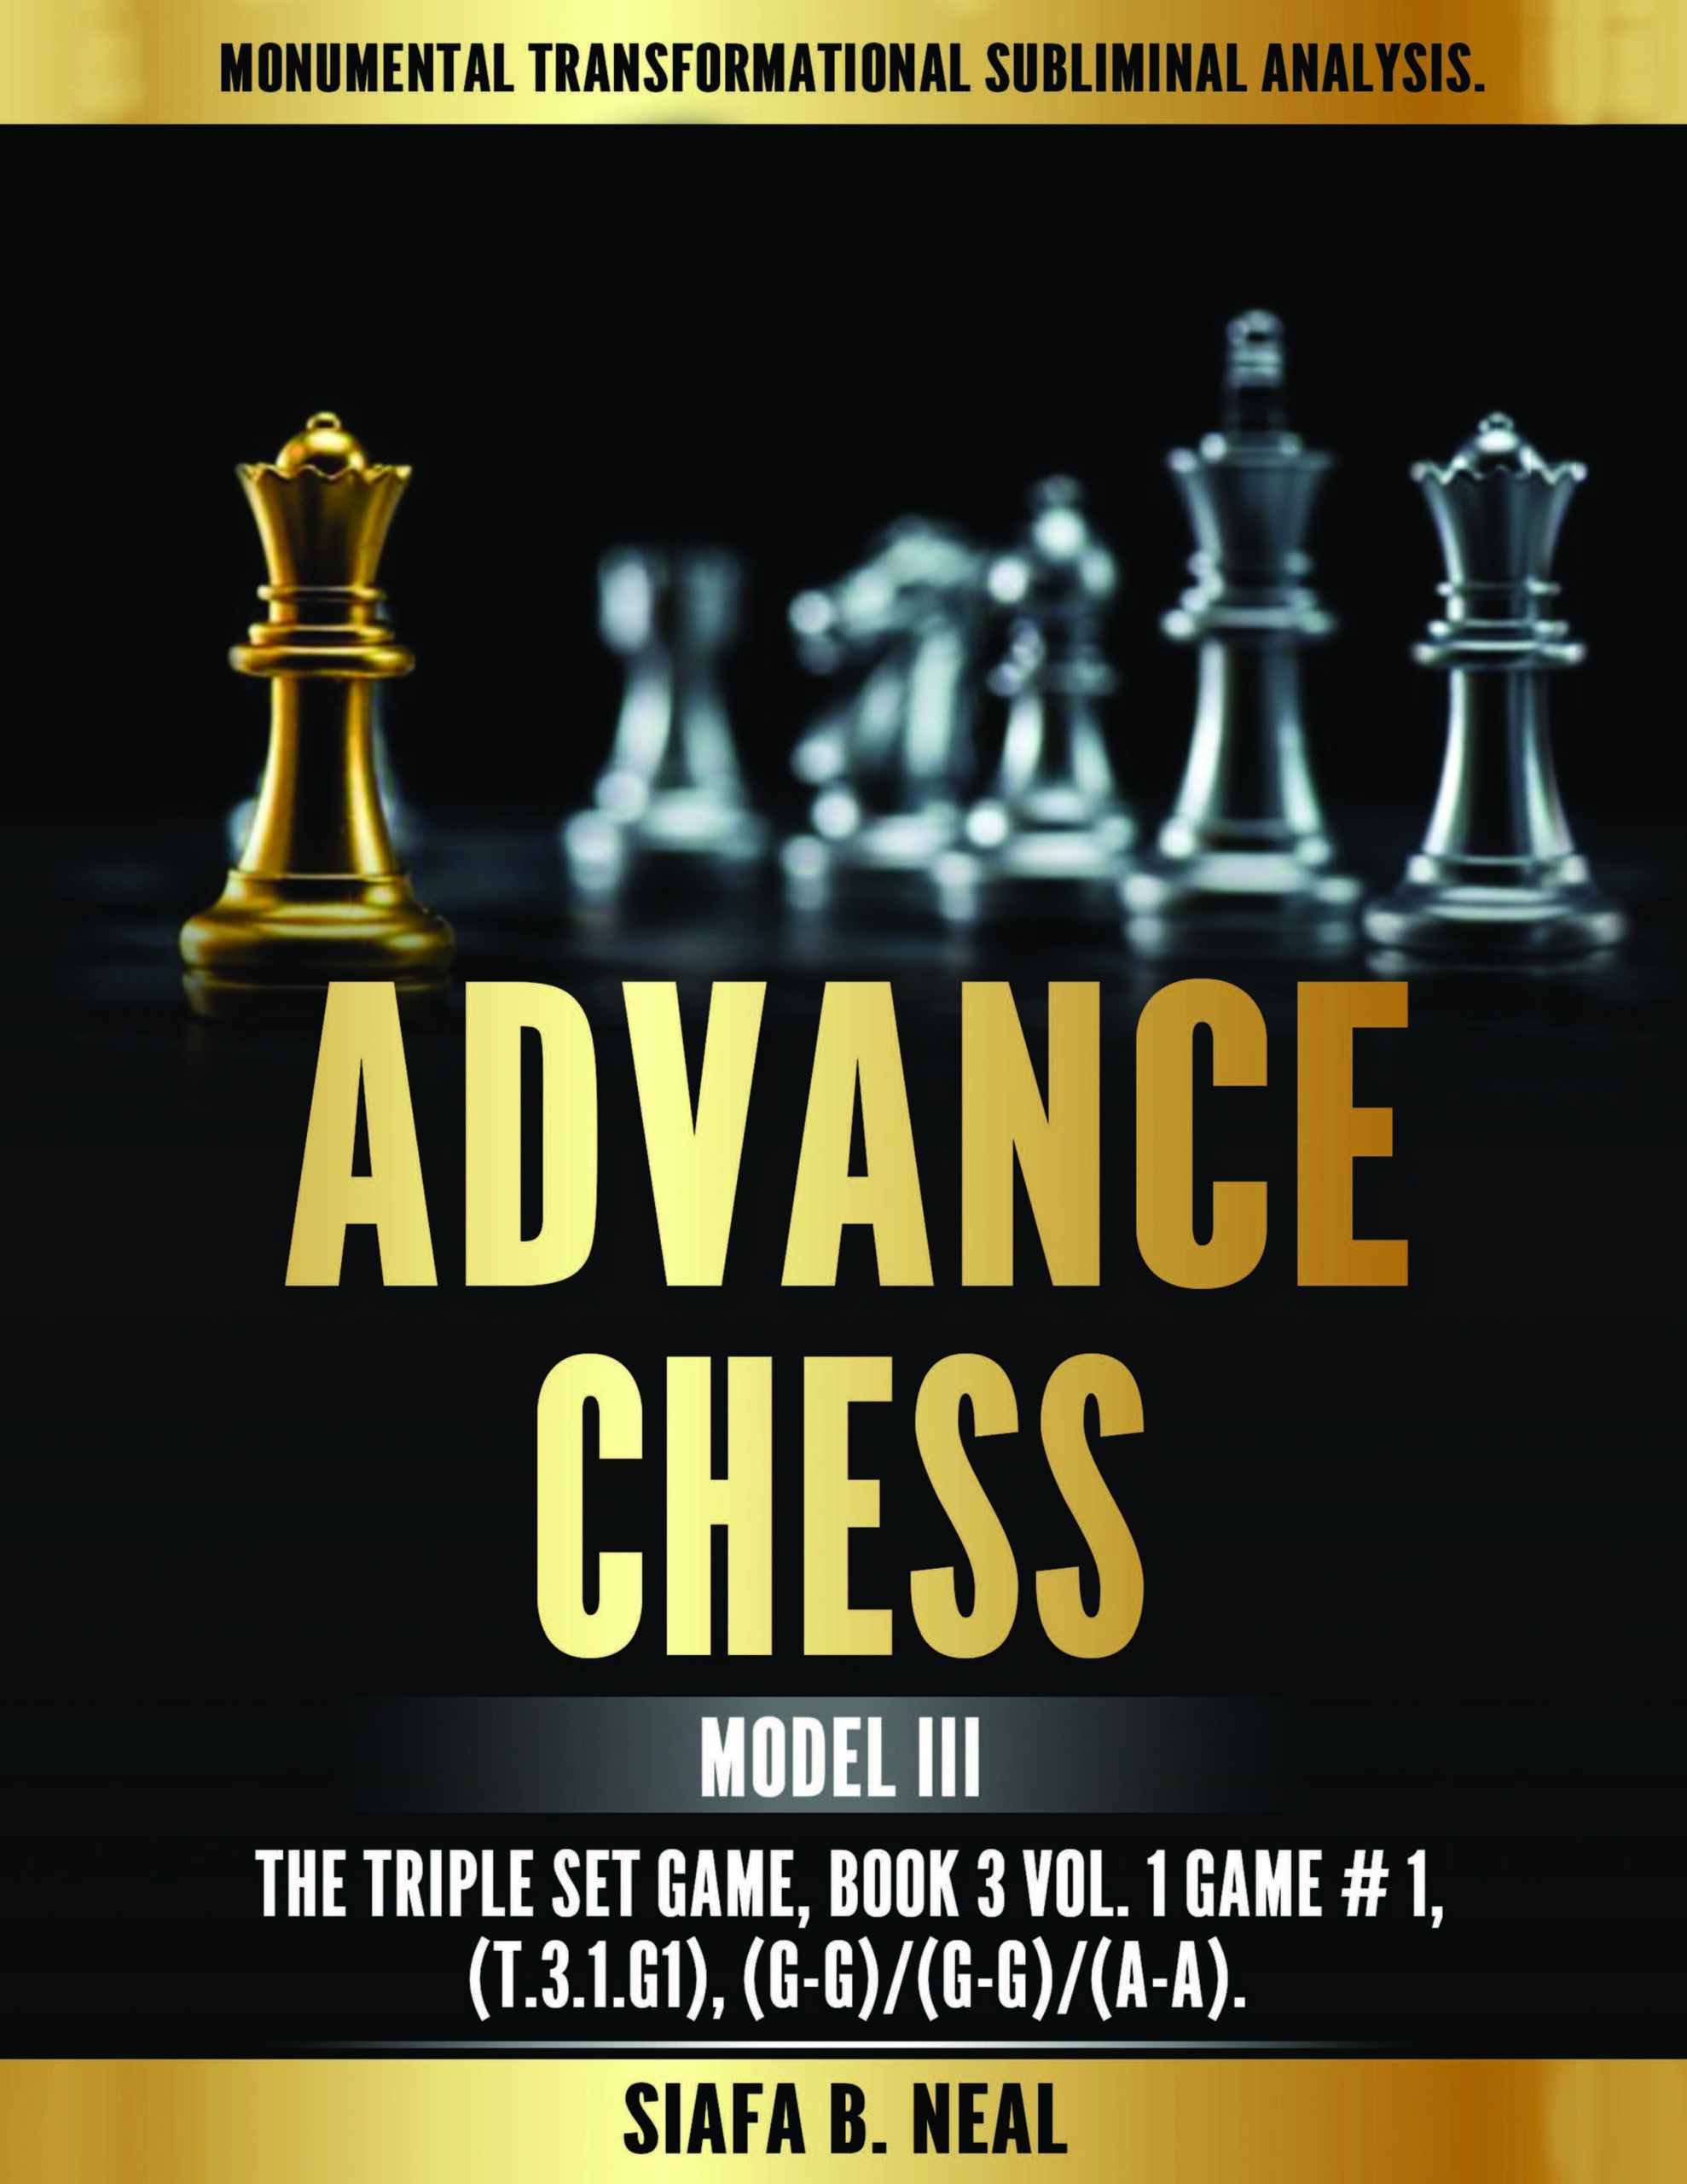 Advance Chess - Model III, The Triple Set Game Monumental Transformational Subliminal Analysis - Copy